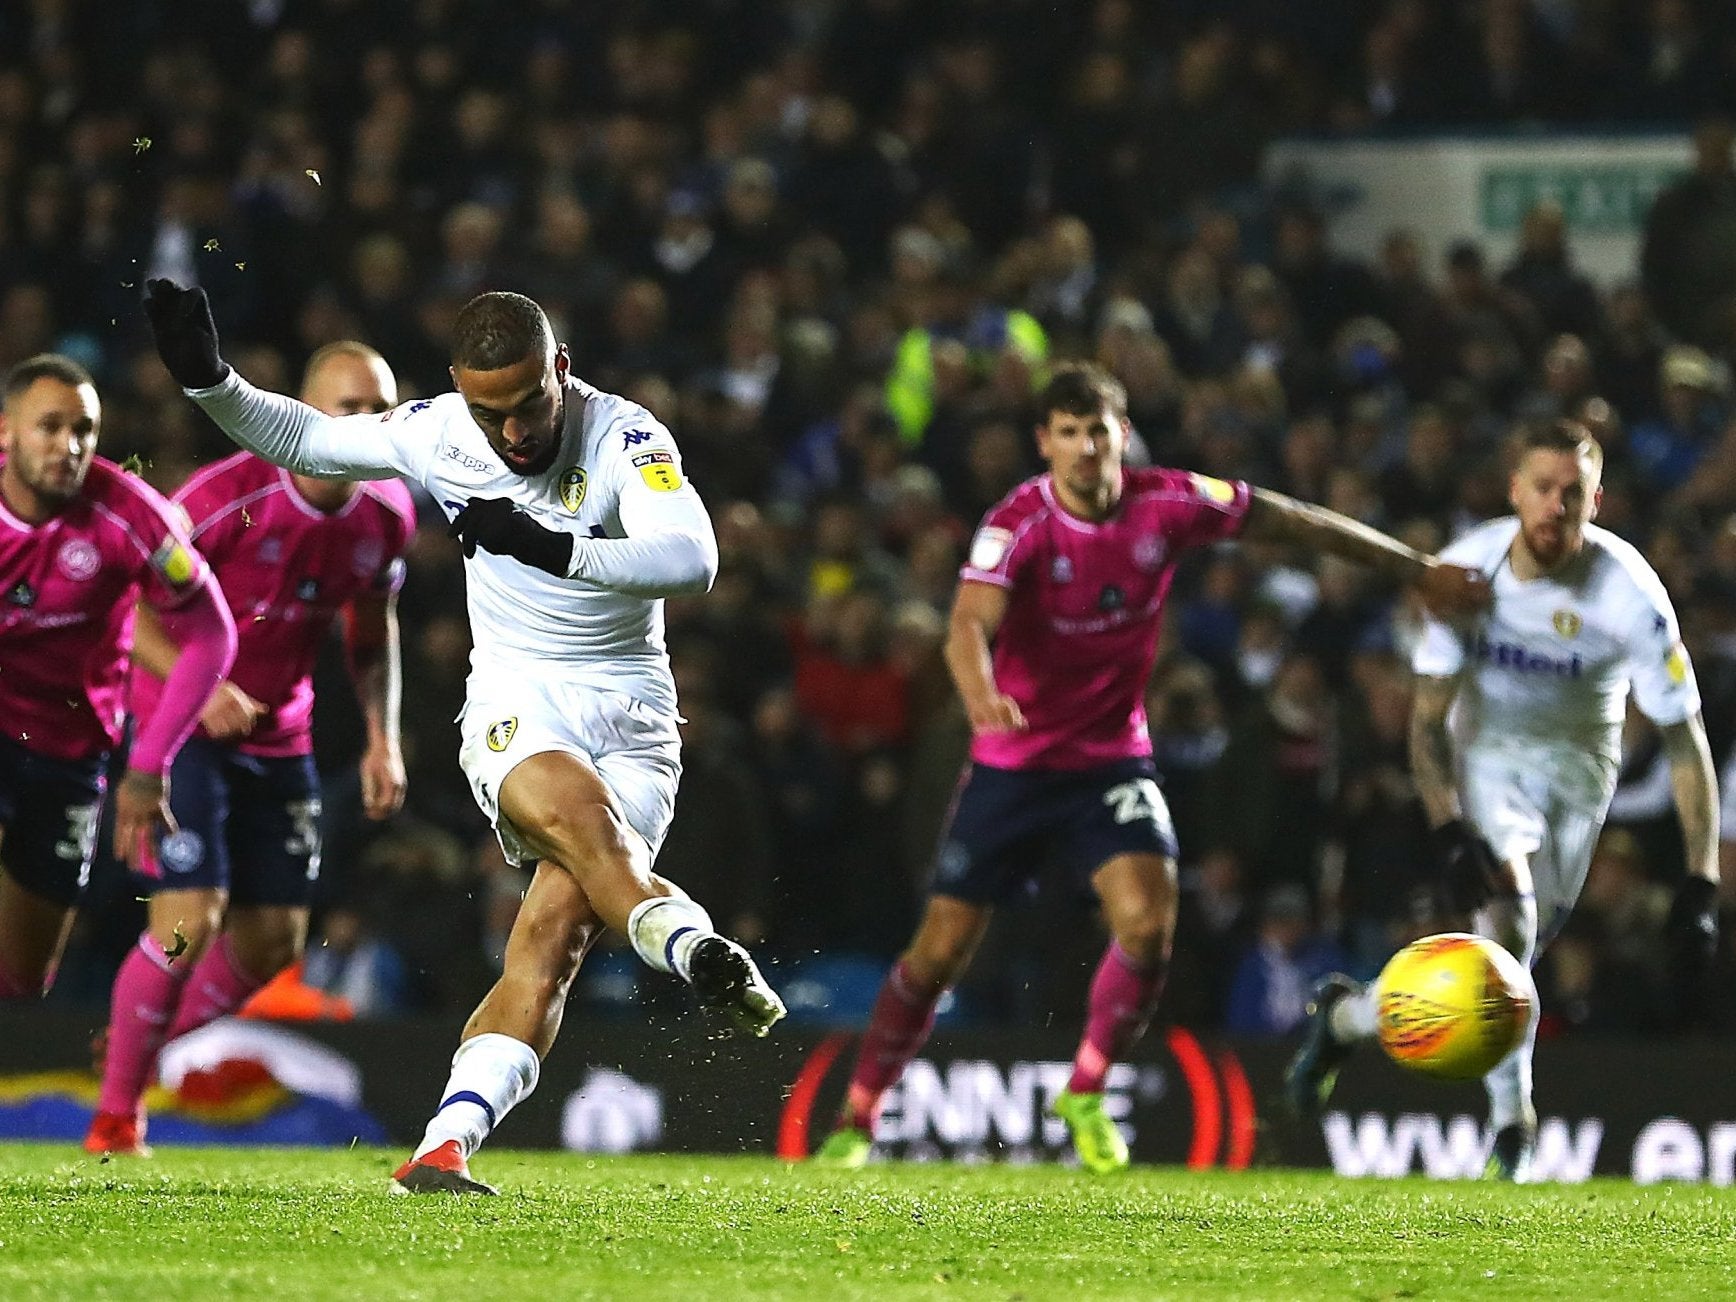 Kemar Roofe scores Leeds United's second goal in the victory over QPR